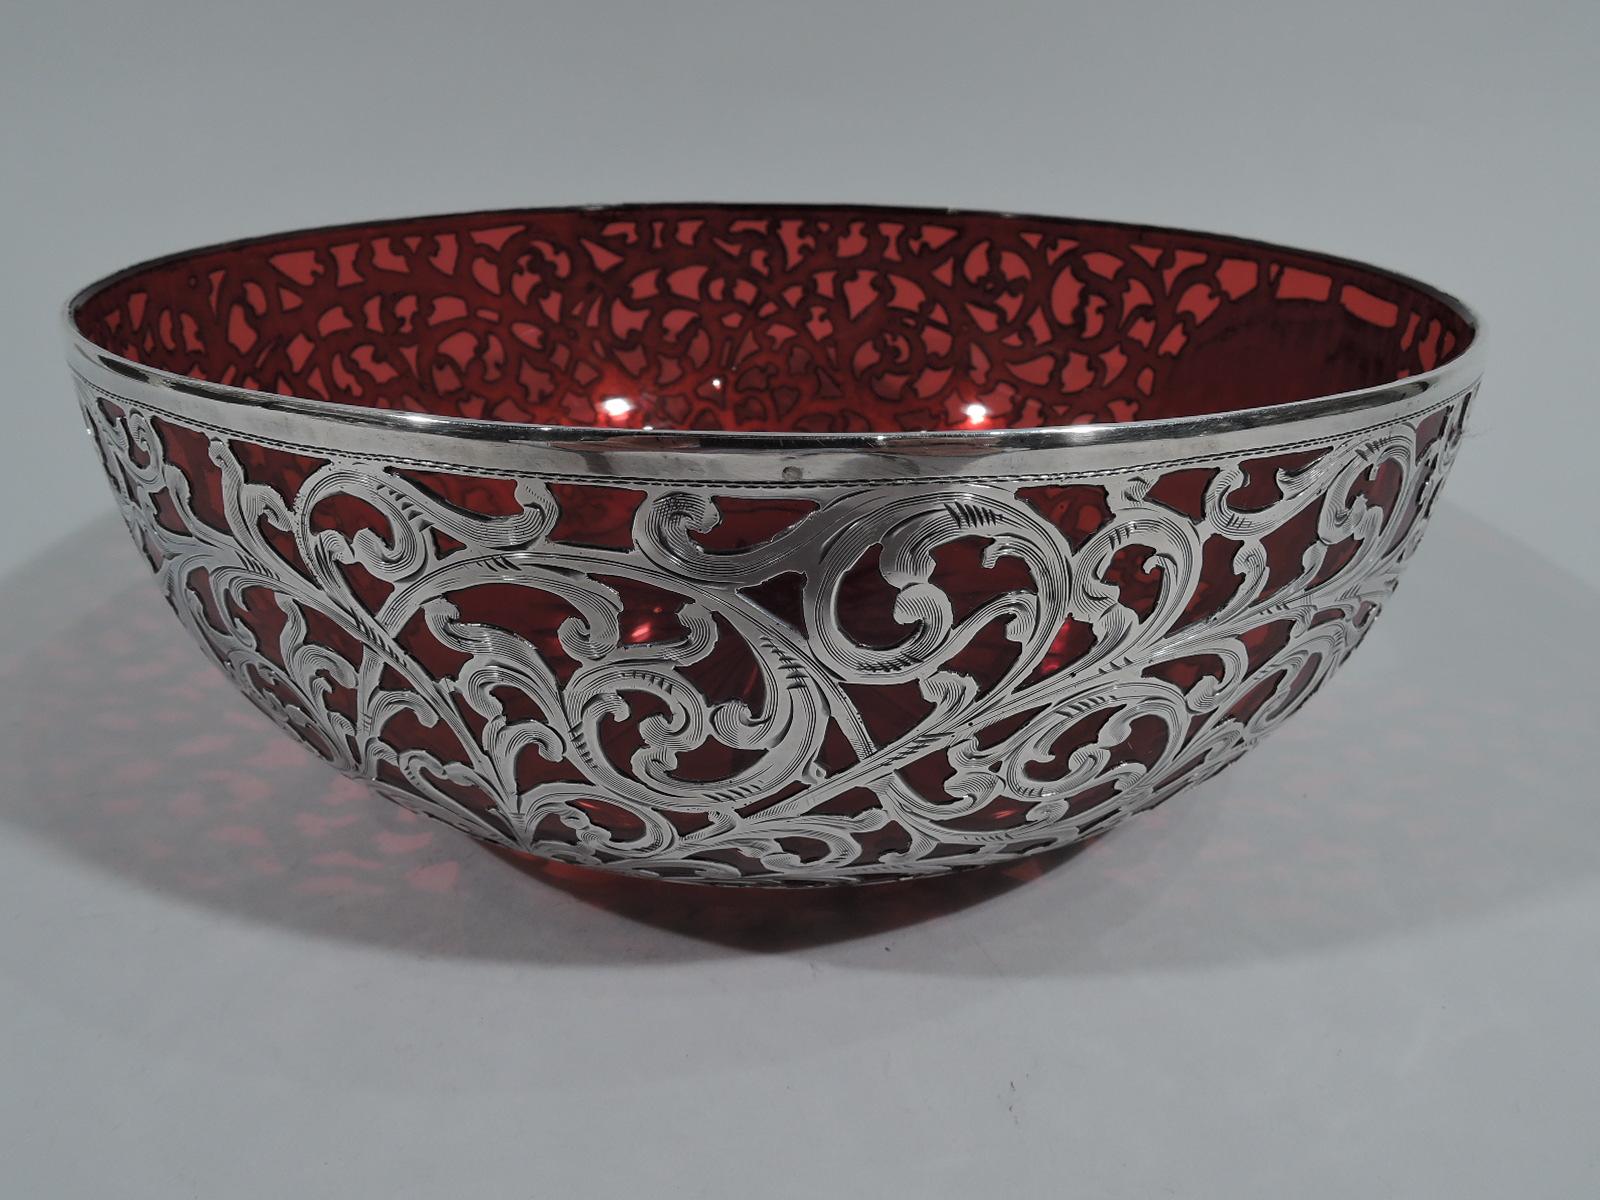 Beautiful Art Nouveau red glass bowl with silver overlay. Made by Alvin in Providence, circa 1900. Round with curved sides and star cut to underside. Engraved overlay in dense scrollwork pattern. Oval cartouche (vacant). Fully marked and numbered